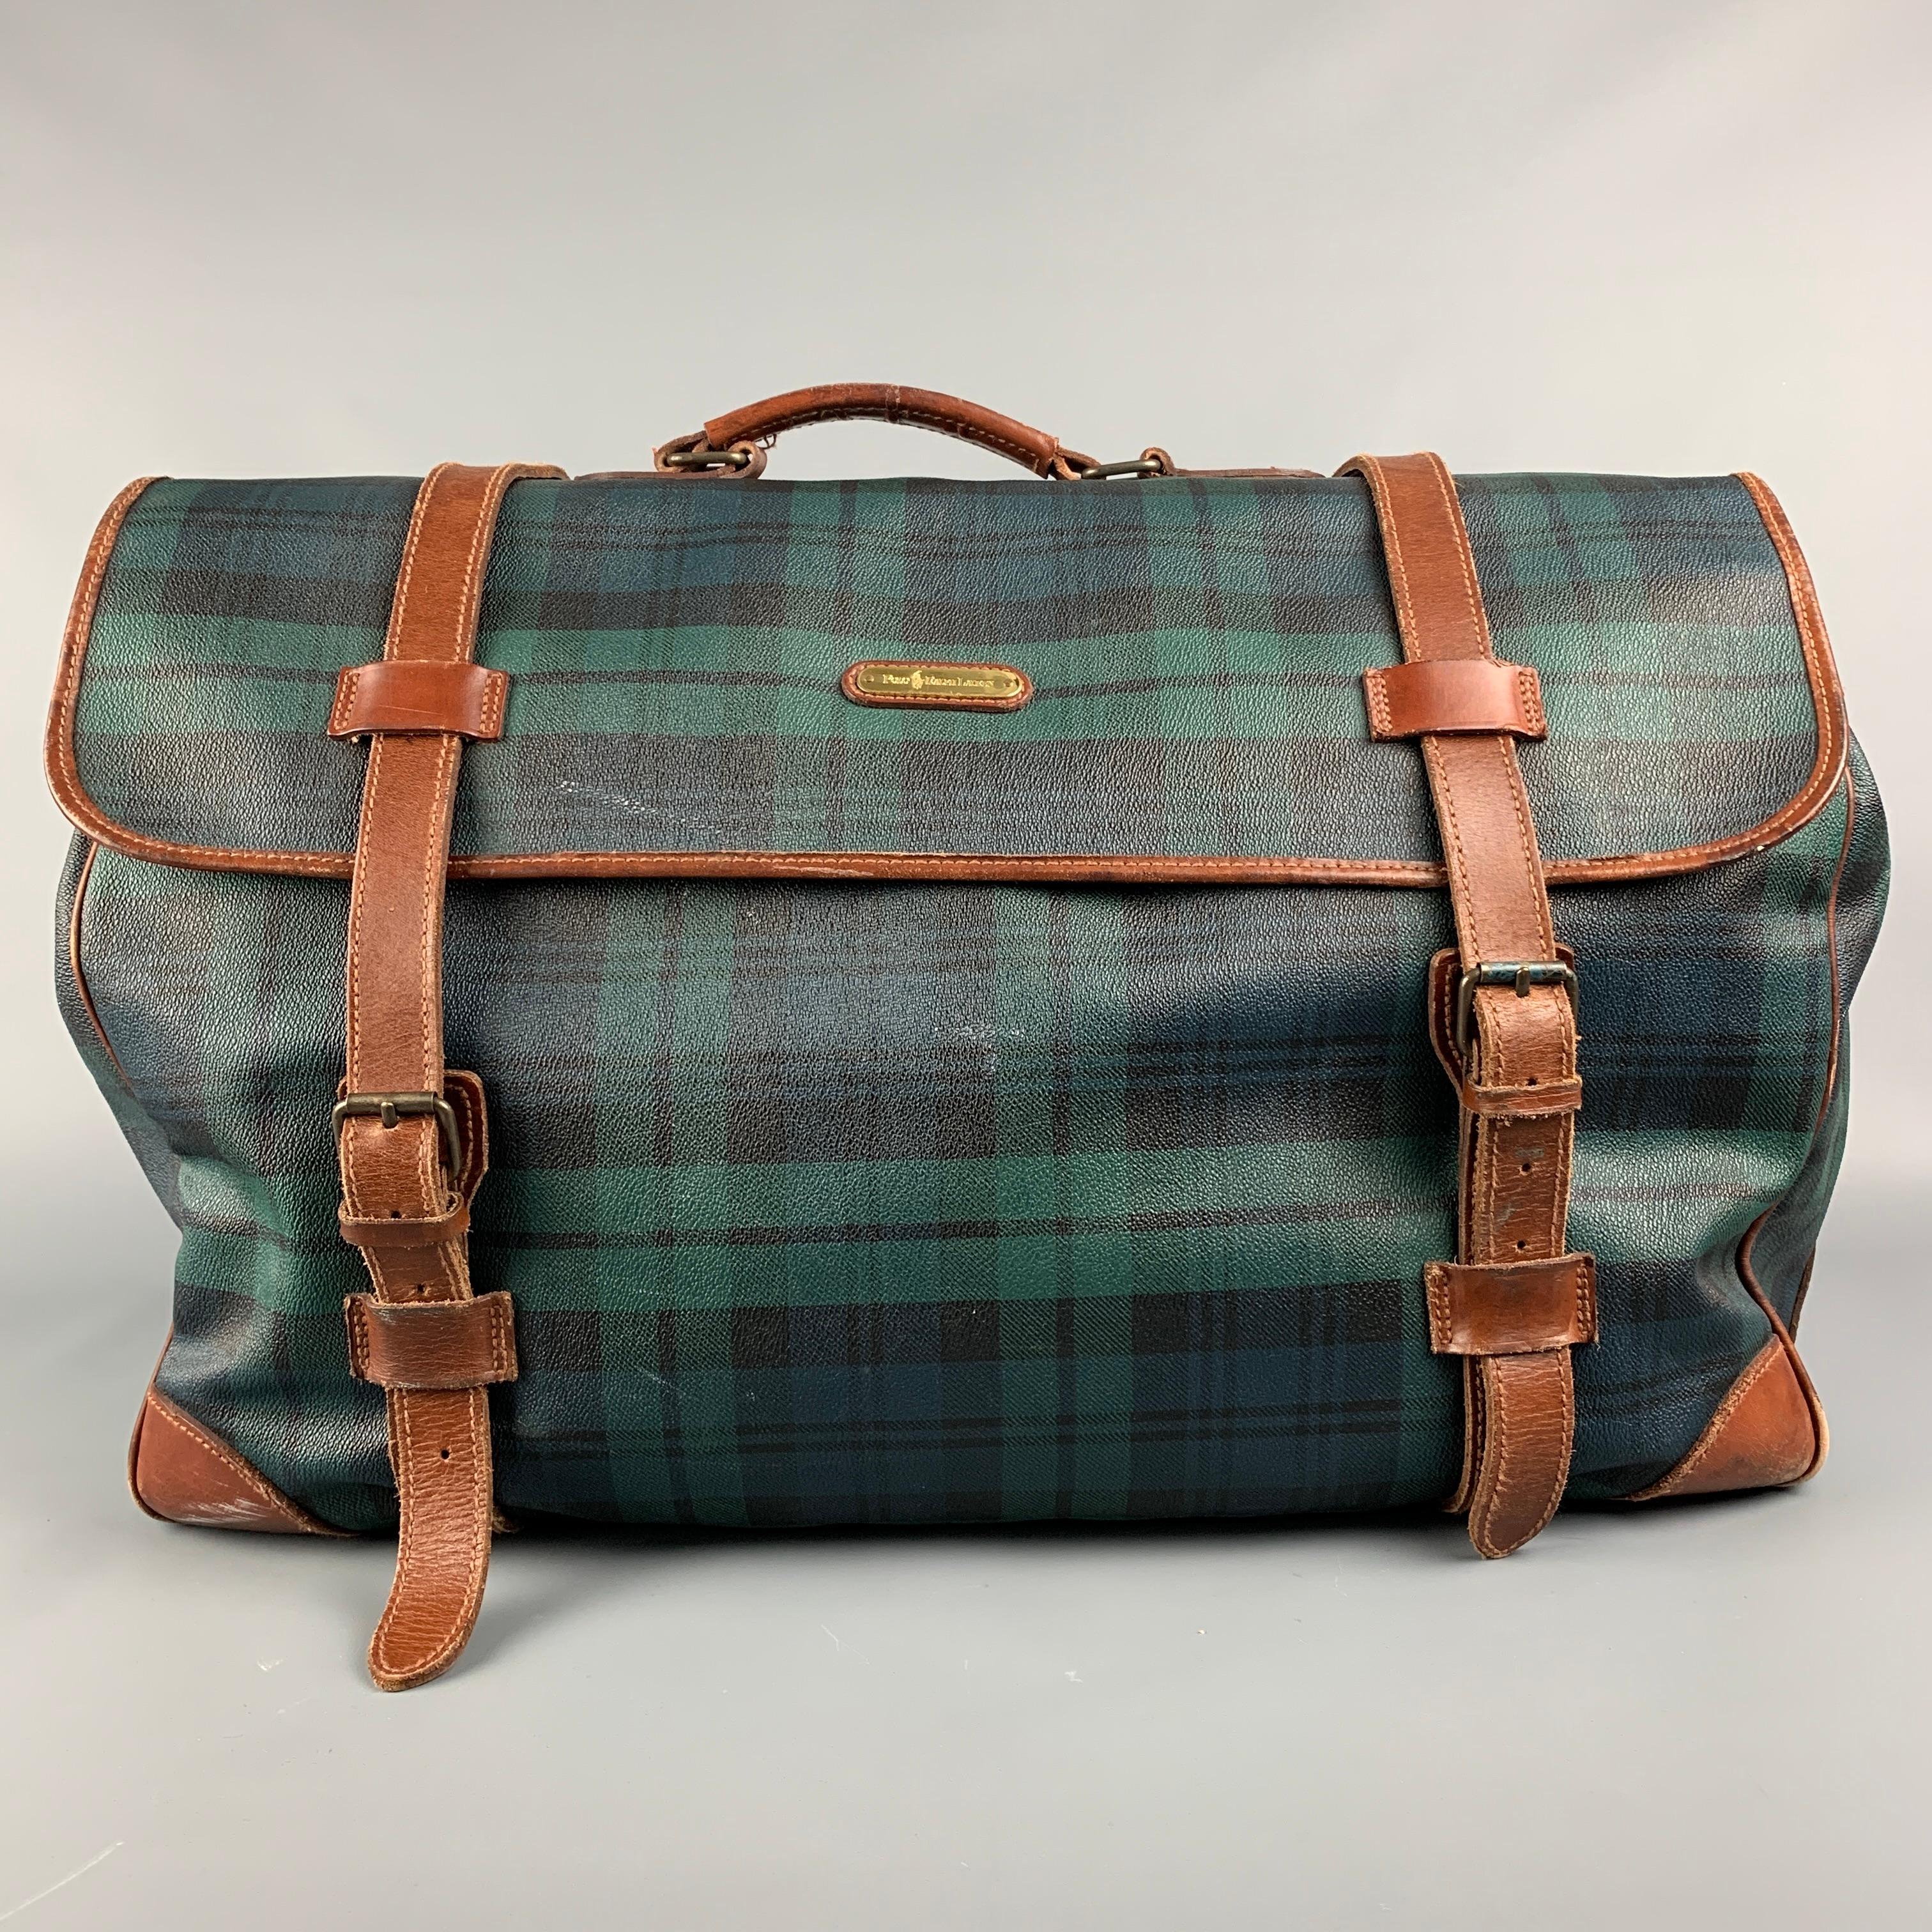 Vintage RALPH LAUREN bag comes in a green & black blackwatch coated canvas featuring a weekender style, leather trim, top handles, inner slots, and a double buckle strap closure. Includes brush. 

Good Pre-Owned Condition. Light marks